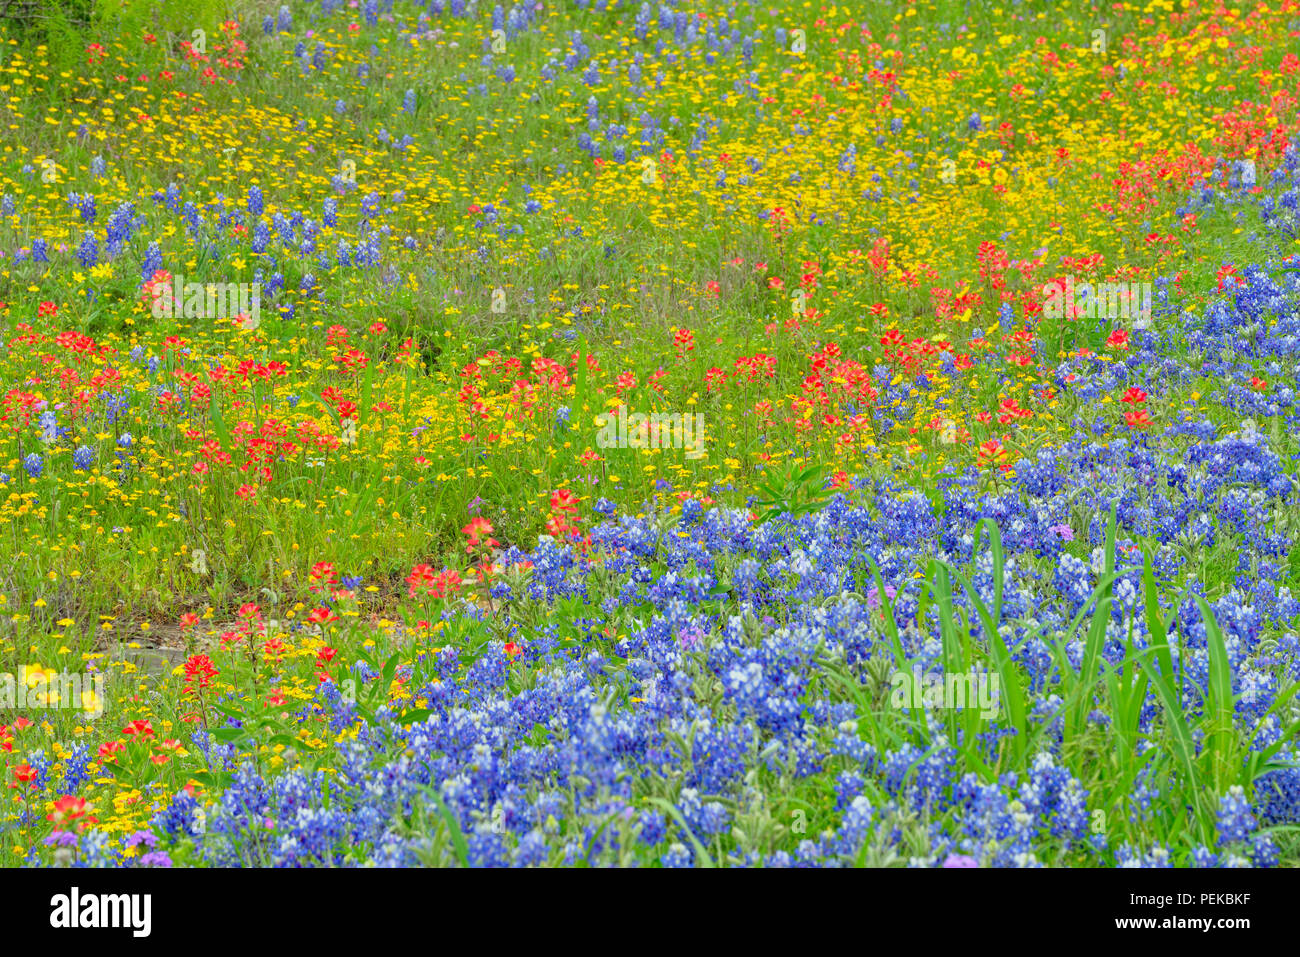 A mix of Texas roadside wildflowers in bloom, Burnet County, Texas, USA Stock Photo